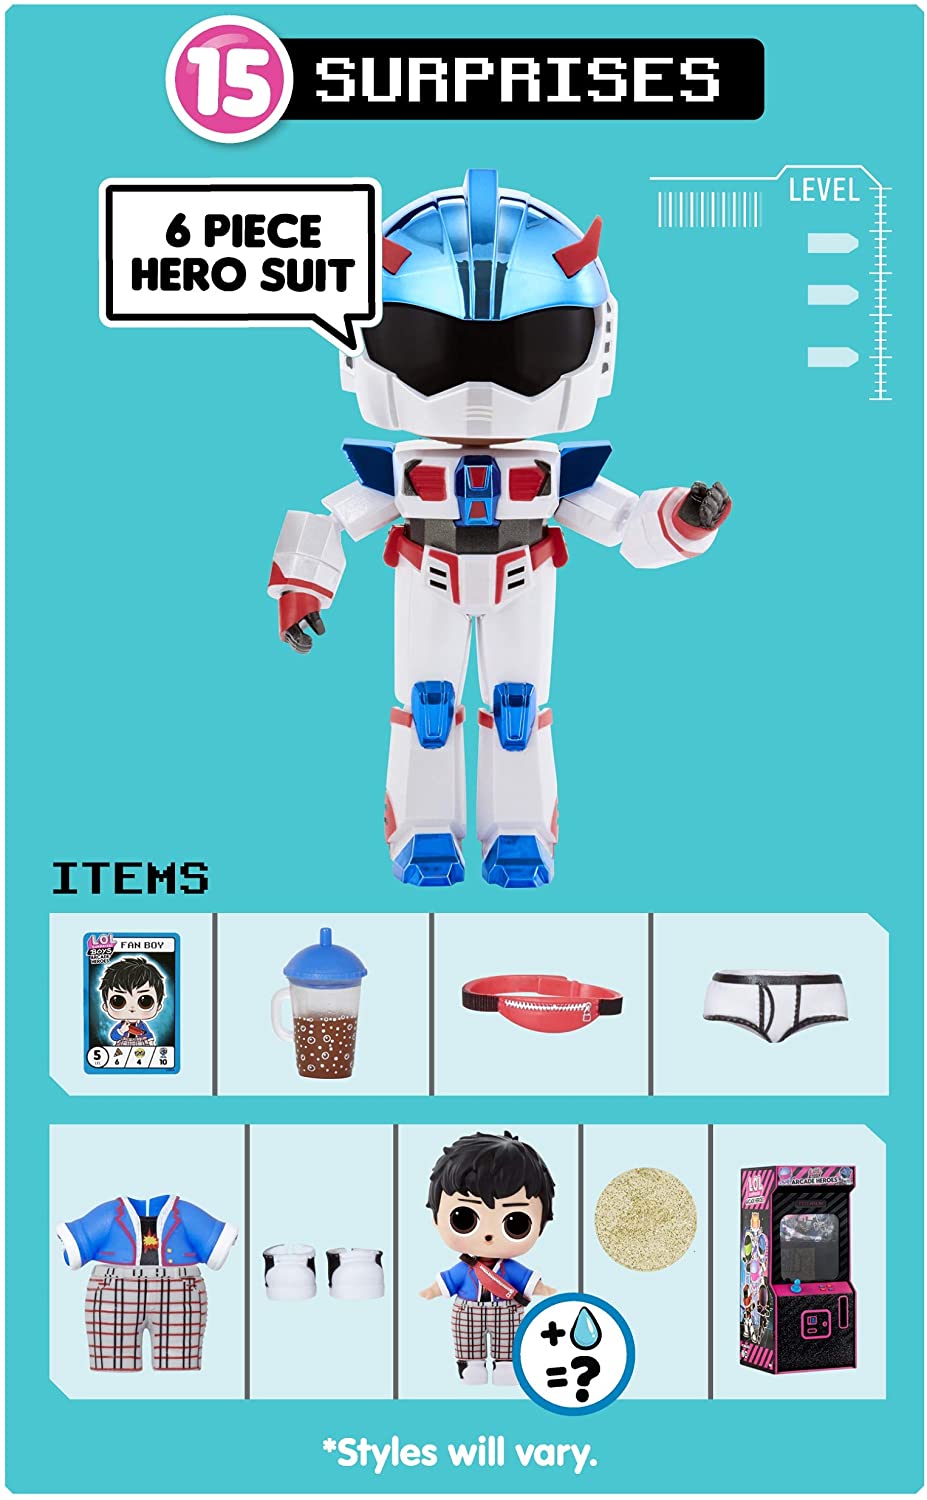 LOL Surprise Boys Arcade Heroes Action Figure Doll with 15 Surprises Including Hero Suit and Boy Doll or Ultra-Rare Girl Doll, Shoes, Accessories, Trading Card